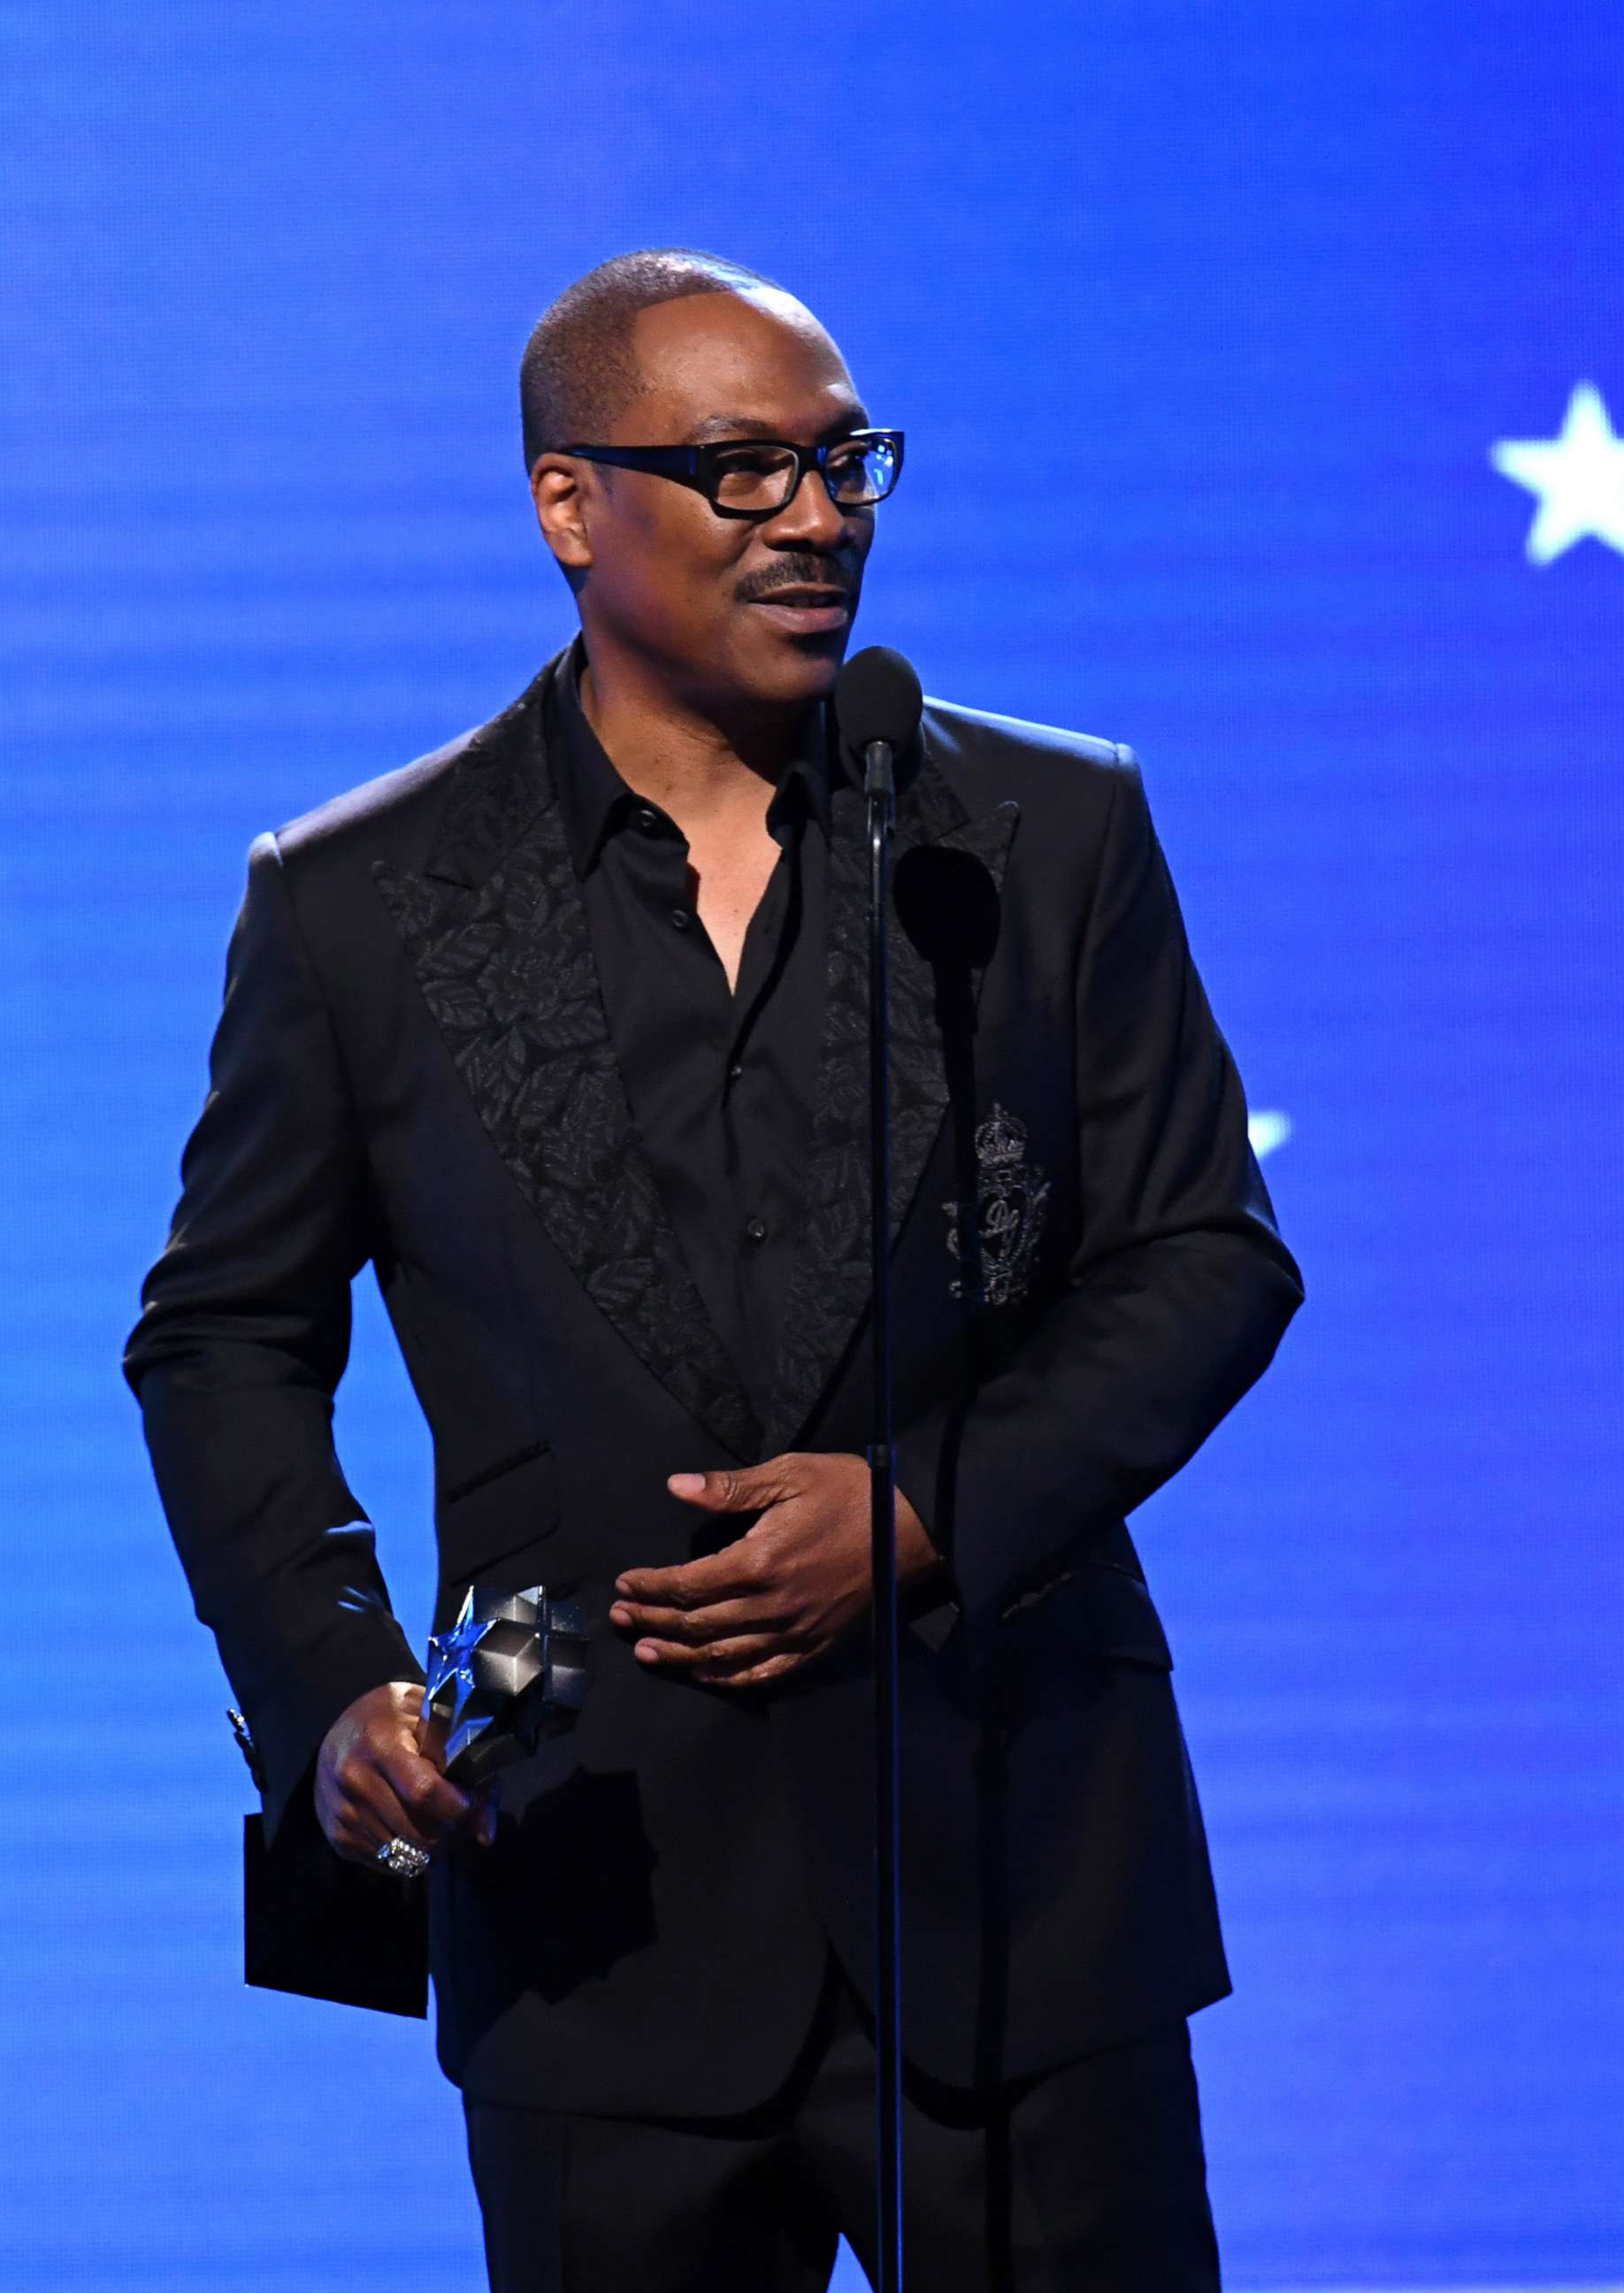 PHOTO: Eddie Murphy accepts the Lifetime Achievement Award onstage during the 25th Annual Critics' Choice Awards at Barker Hangar on Jan. 12, 2020, in Santa Monica, Calif.